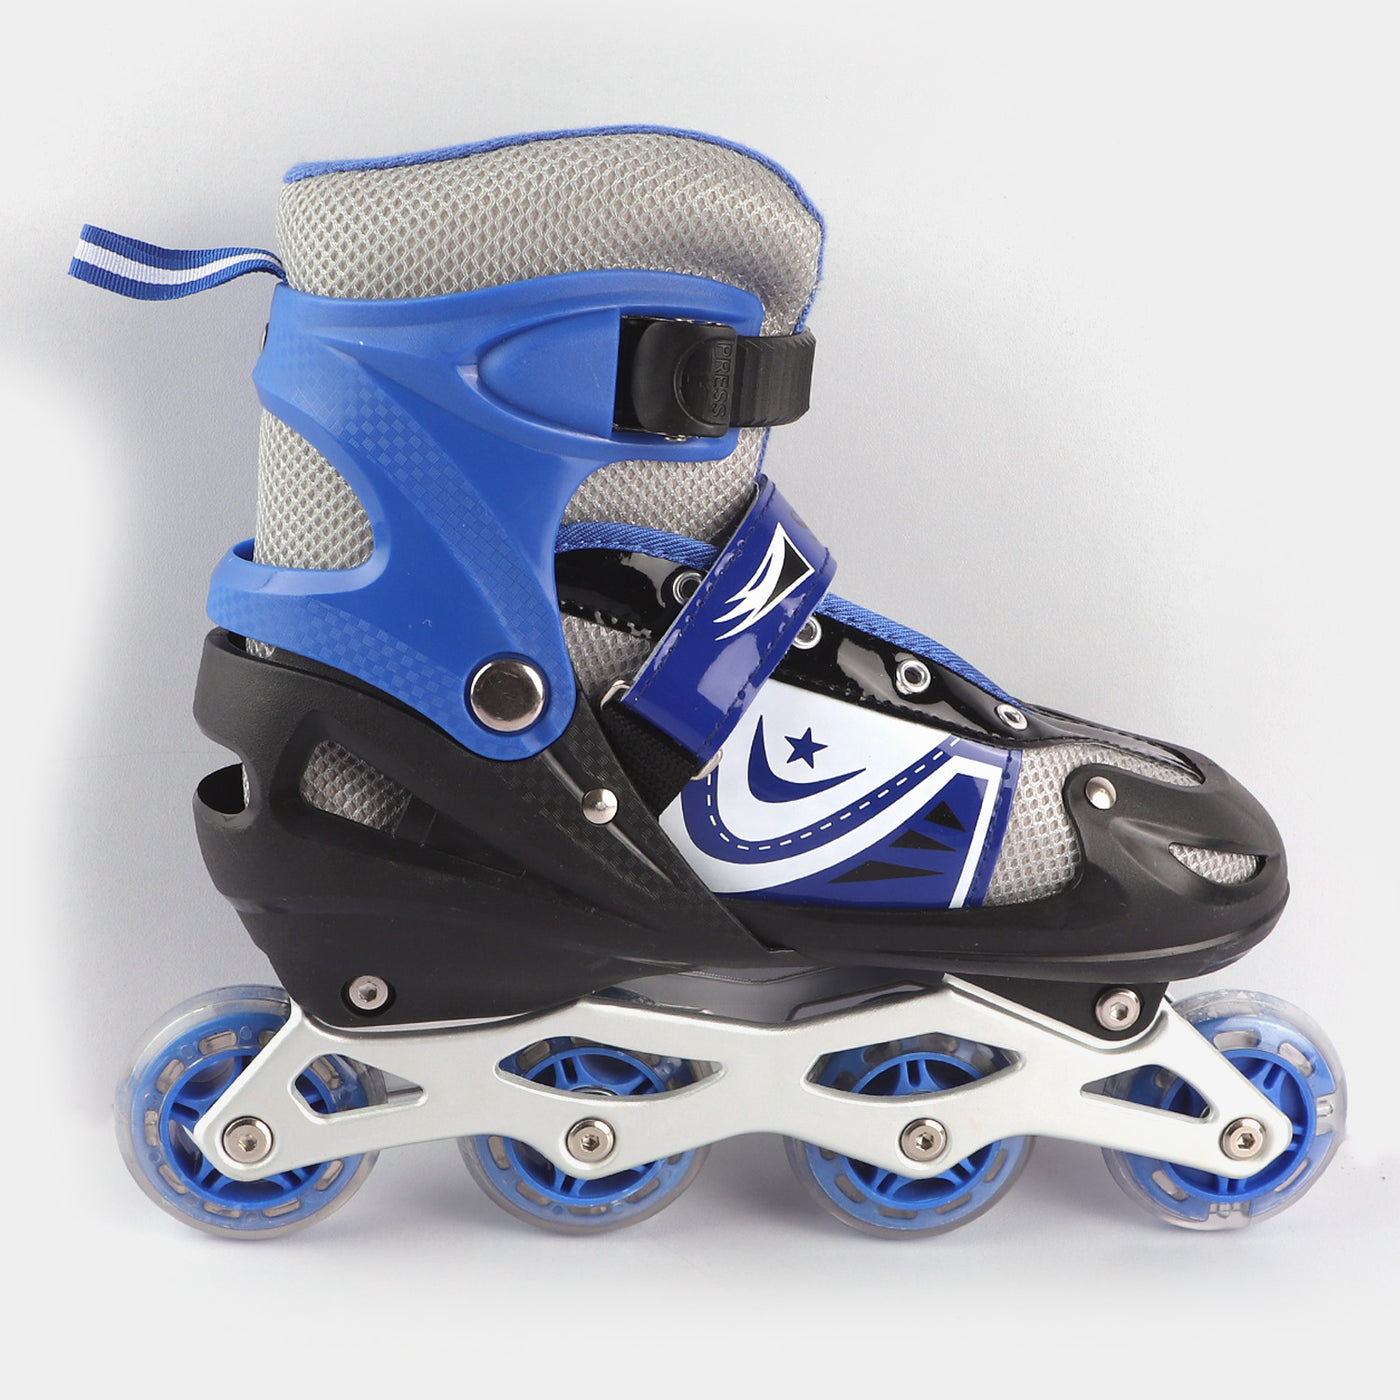 SPORTS SKATE SHOES WITH 6 IN 1 SAFETY PADS SET - BLUE